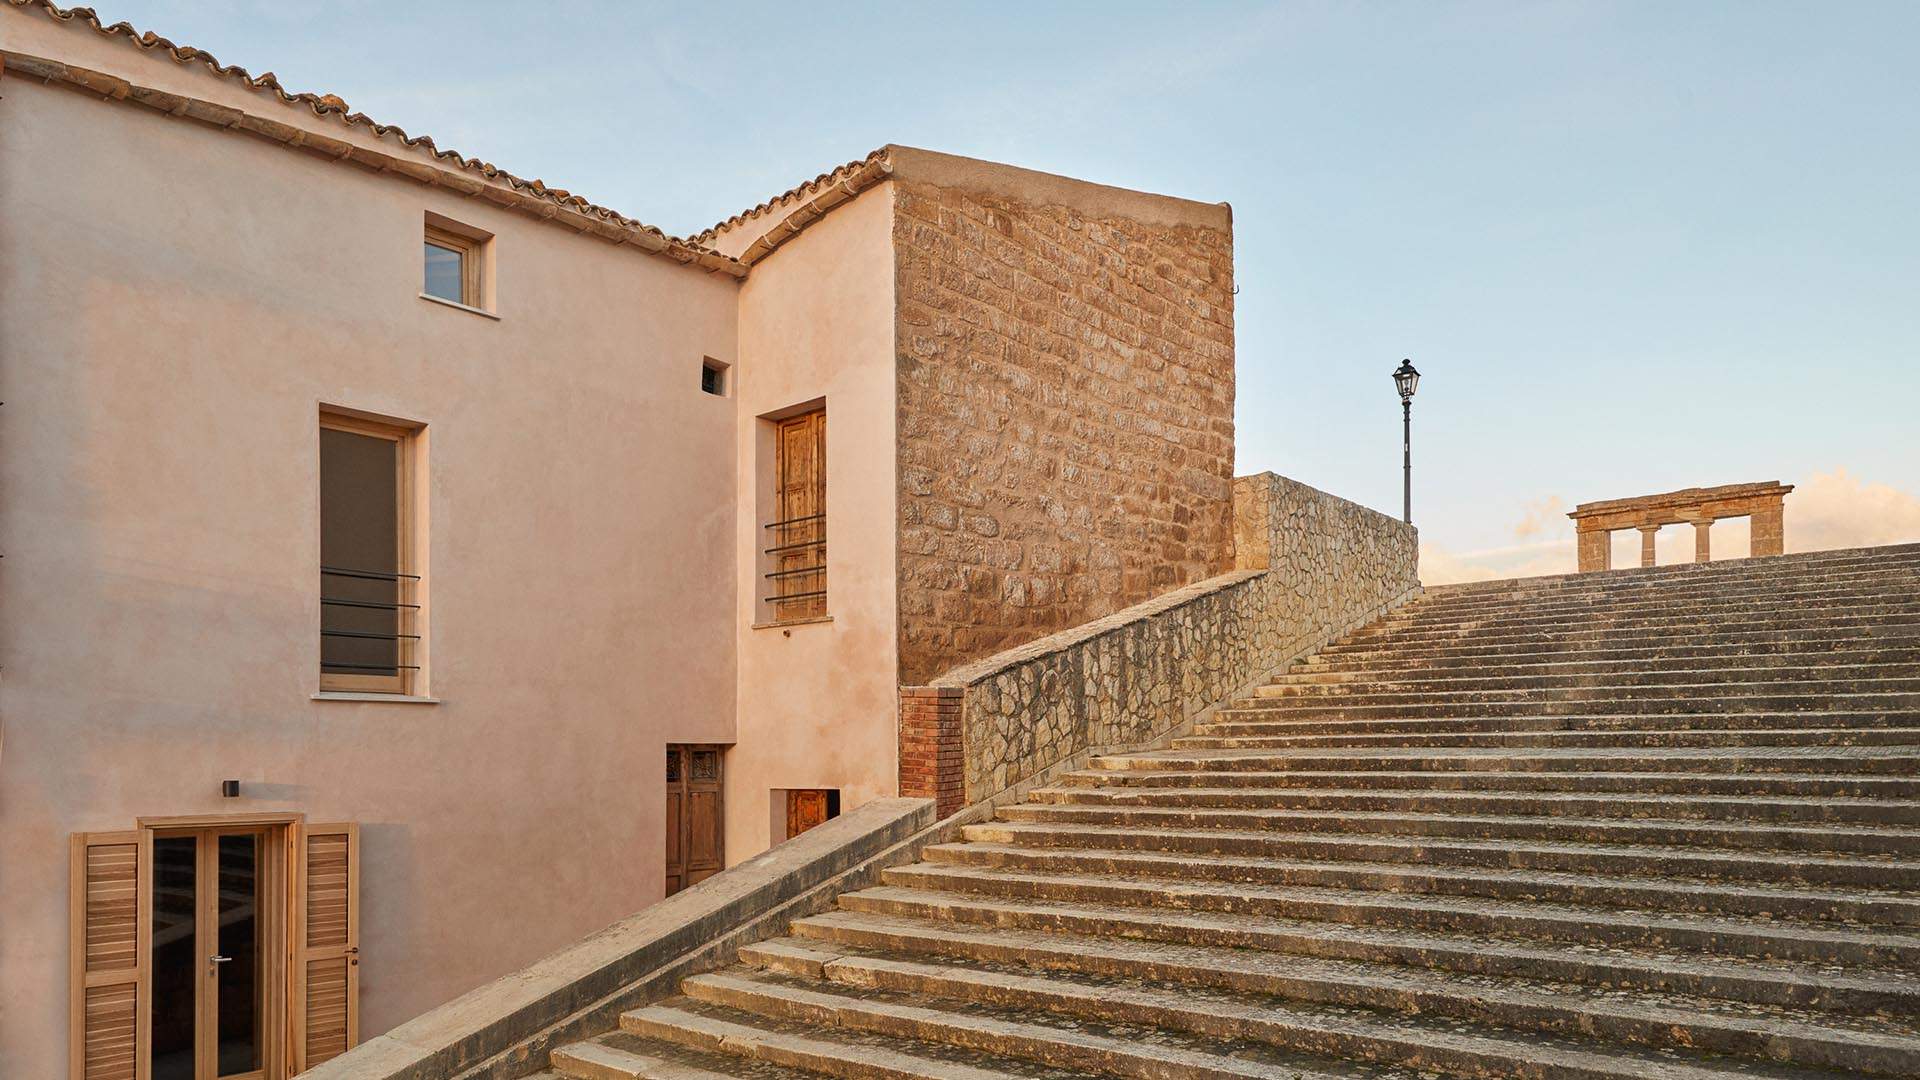 Airbnb Wants You to Spend a Year Living Rent-Free in a Gorgeous Sicily Townhouse